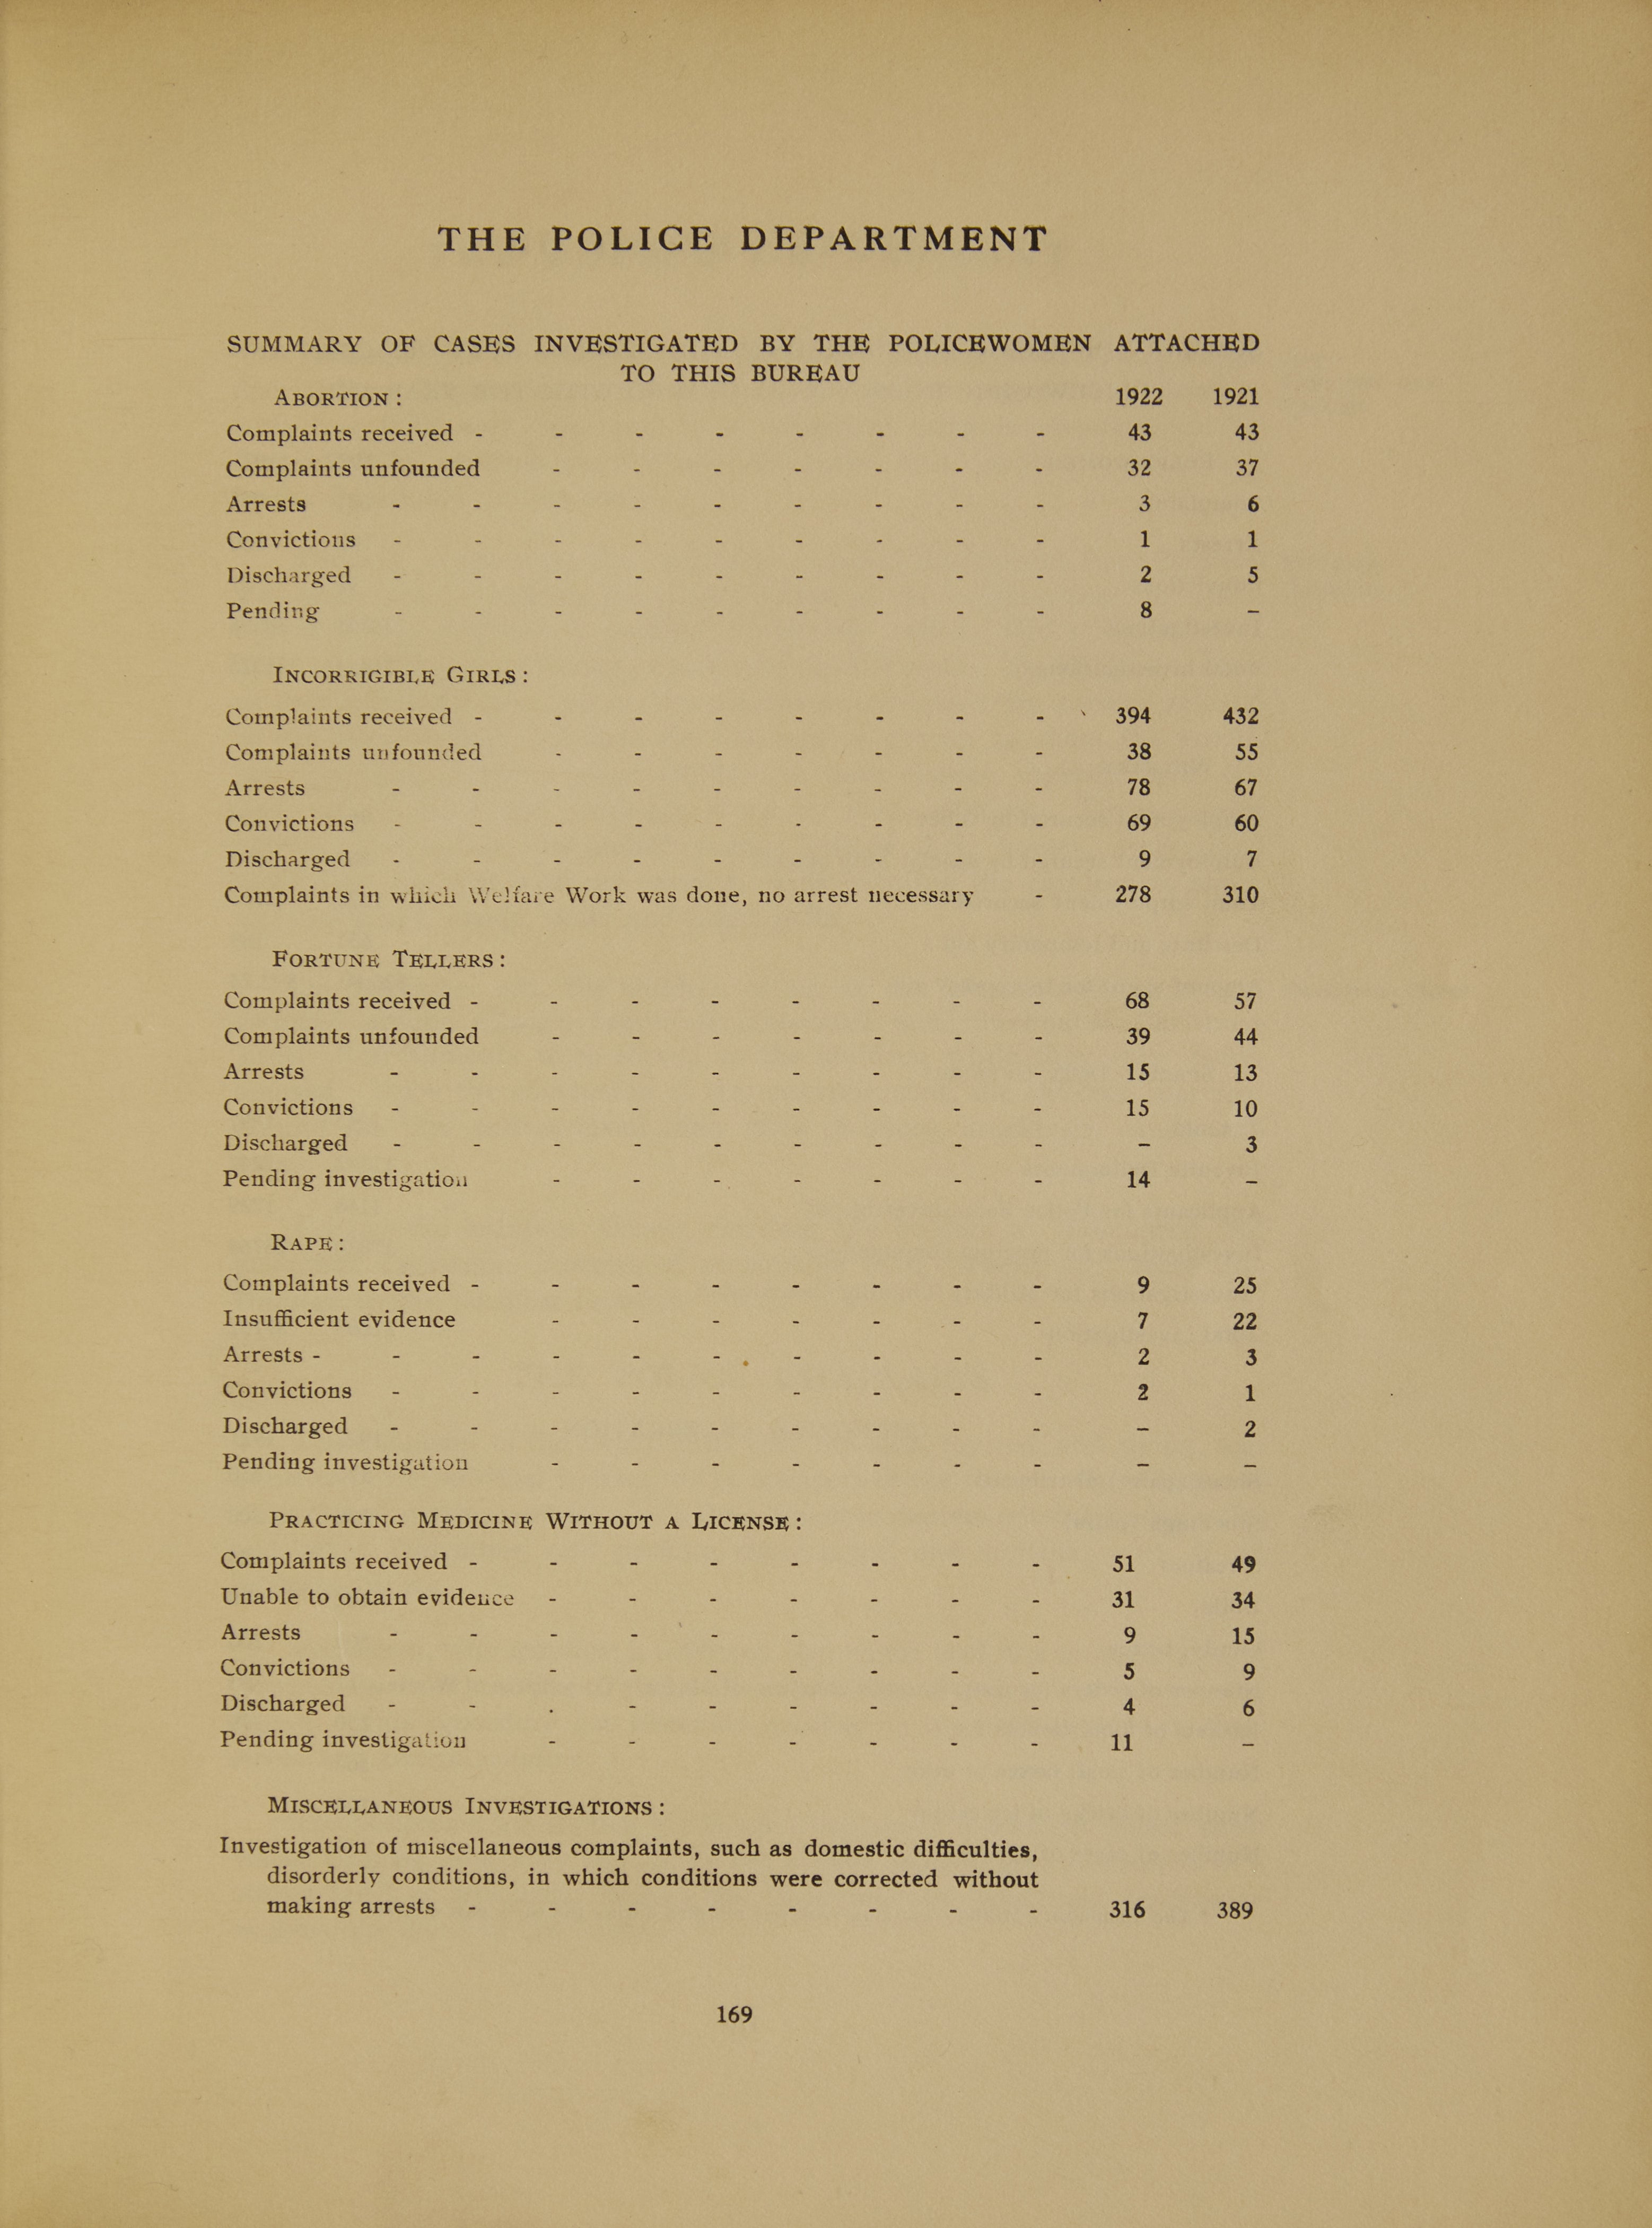 Text page of a summary, in chart form of cases investigated by policewomen in 1922.
                    